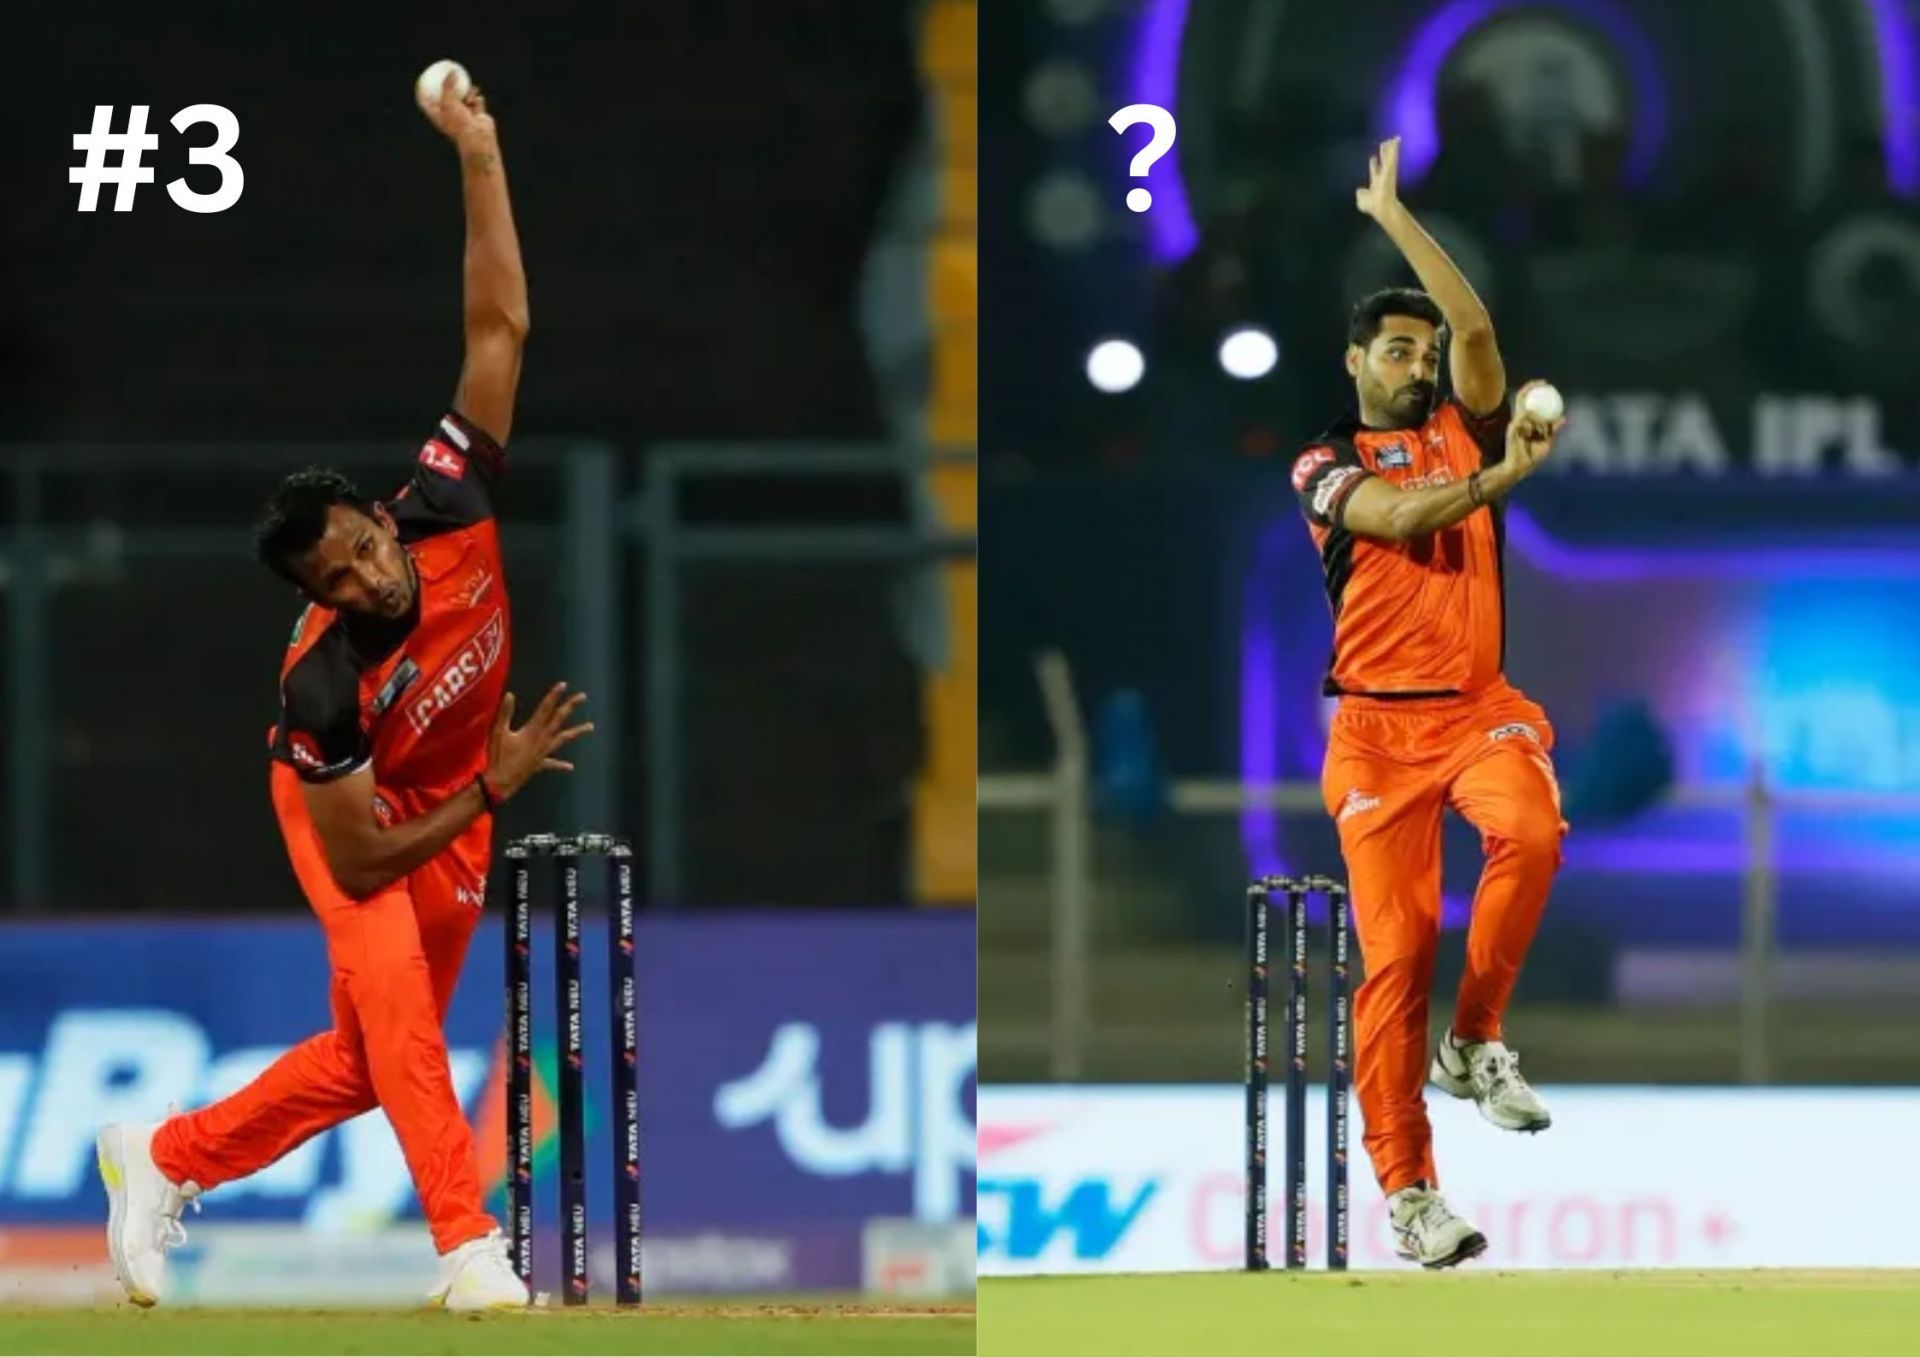 T Natarajan and Bhuvneshwar Kumar remain pivotal players in the SRH ranks even today (Picture Credits: IPL).